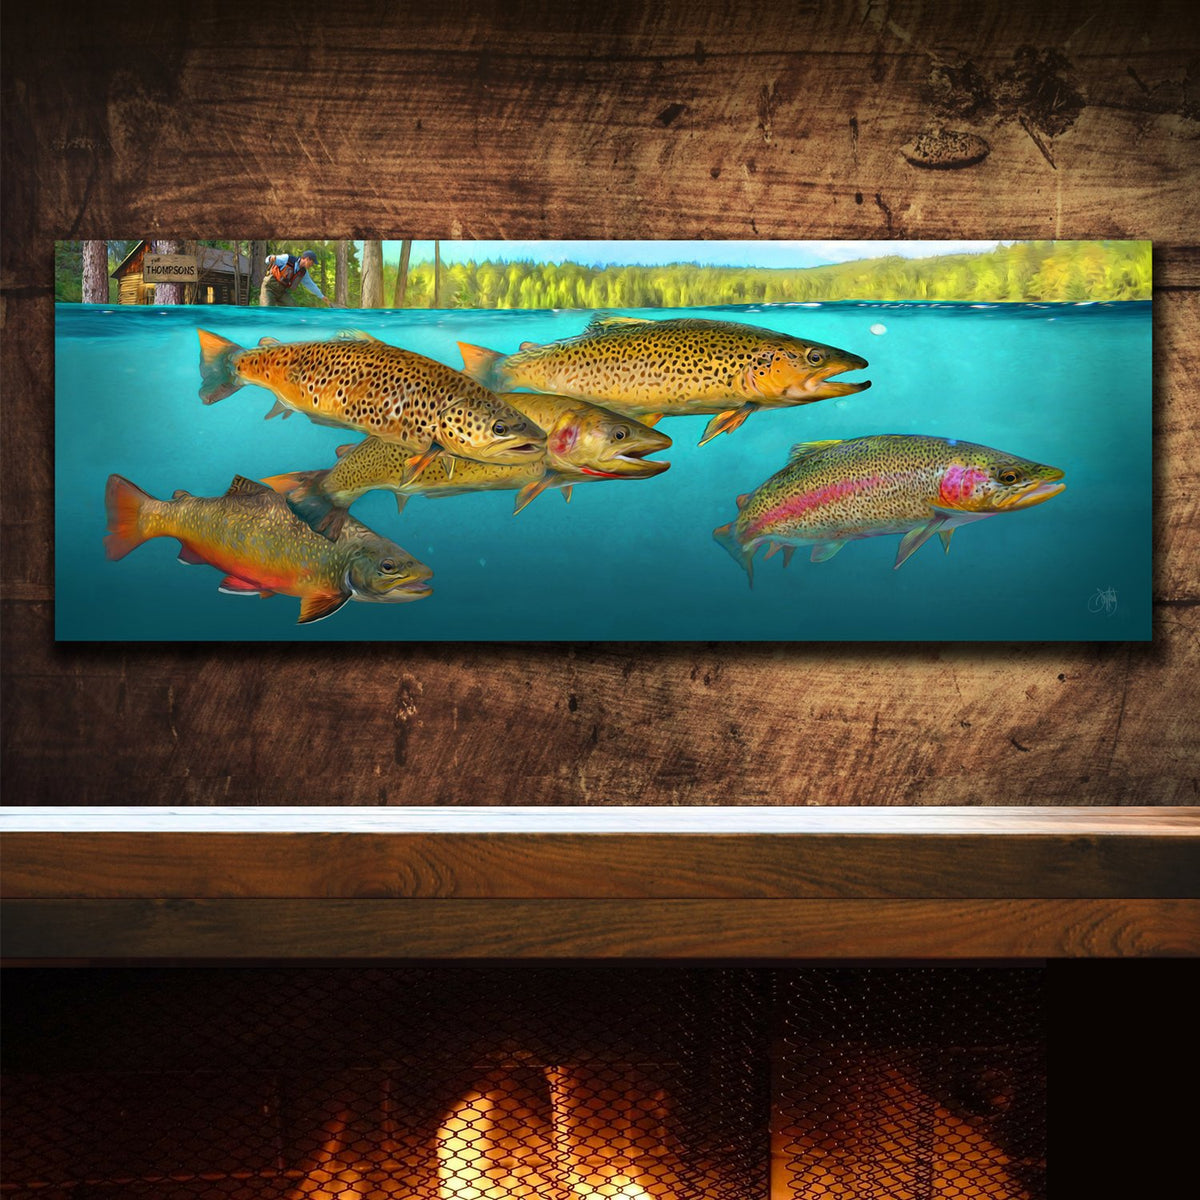  GRAPHICS & MORE Trout River Lake Fly Fish Fishing Gift Wrap  Wrapping Paper Rolls : Health & Household